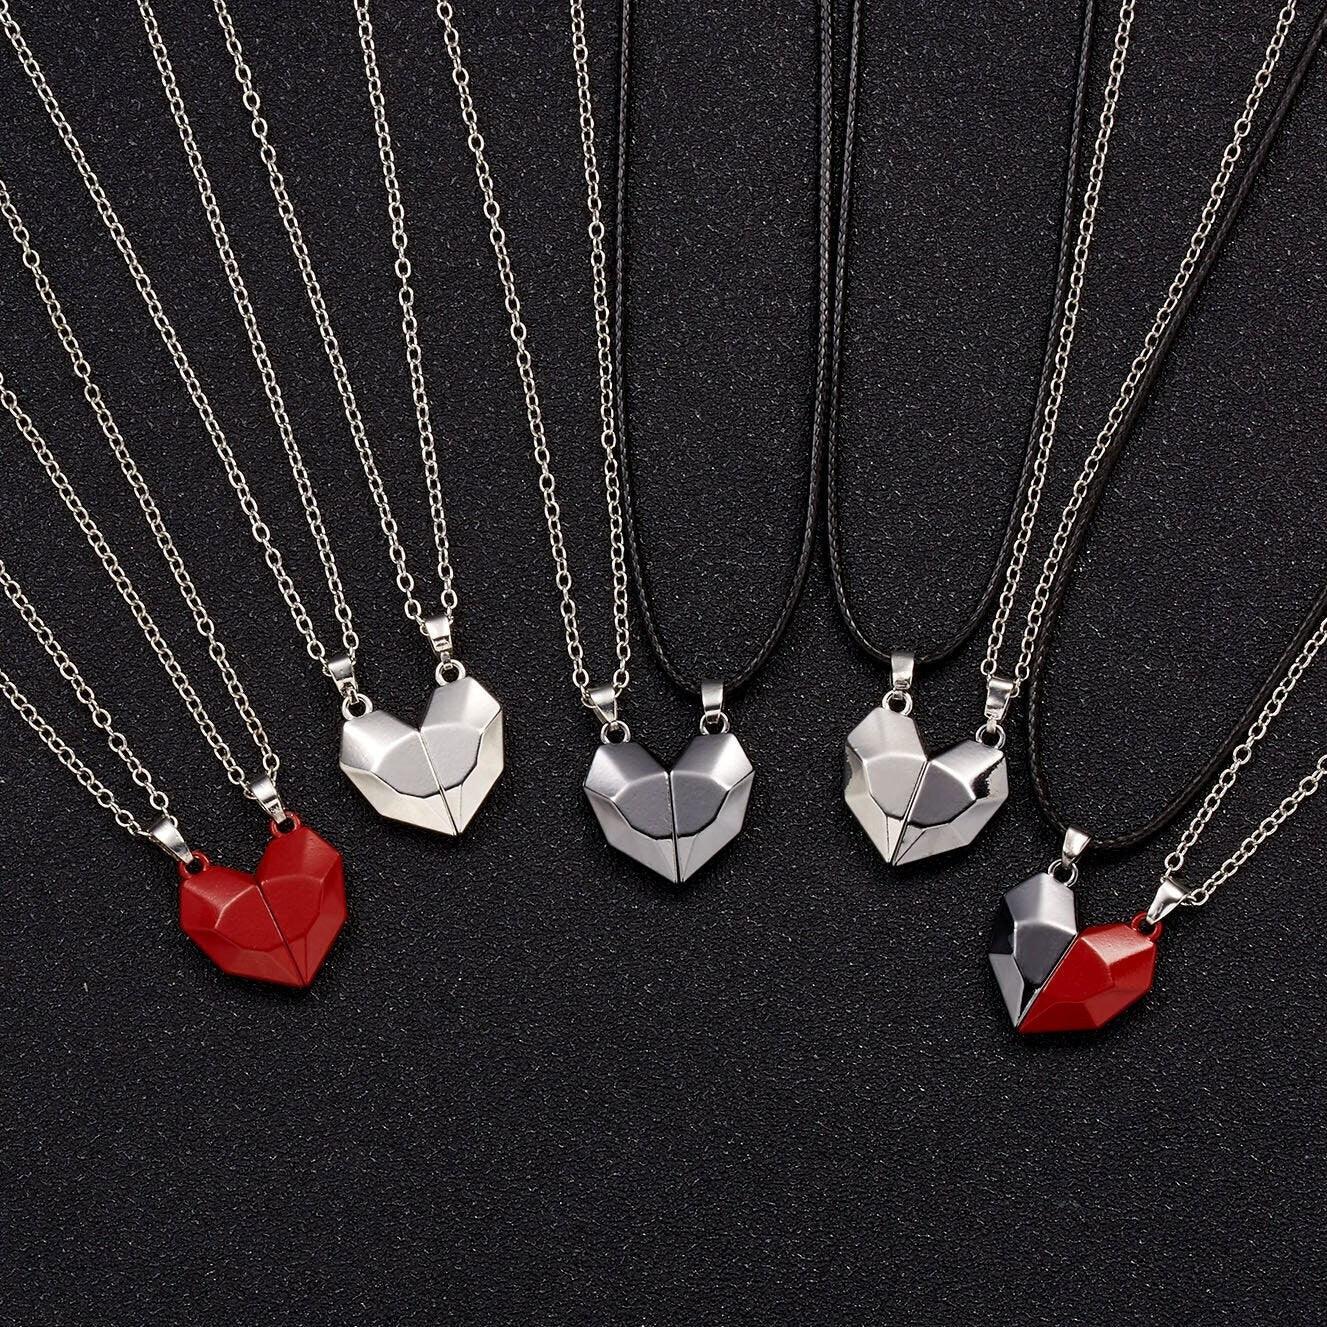 2pcs Magnetic Heart Necklace, Couple Necklace, Magnetic Couple Necklace,  Lover Necklace, Miss You Necklace, Friendship & Love Christmas Gift